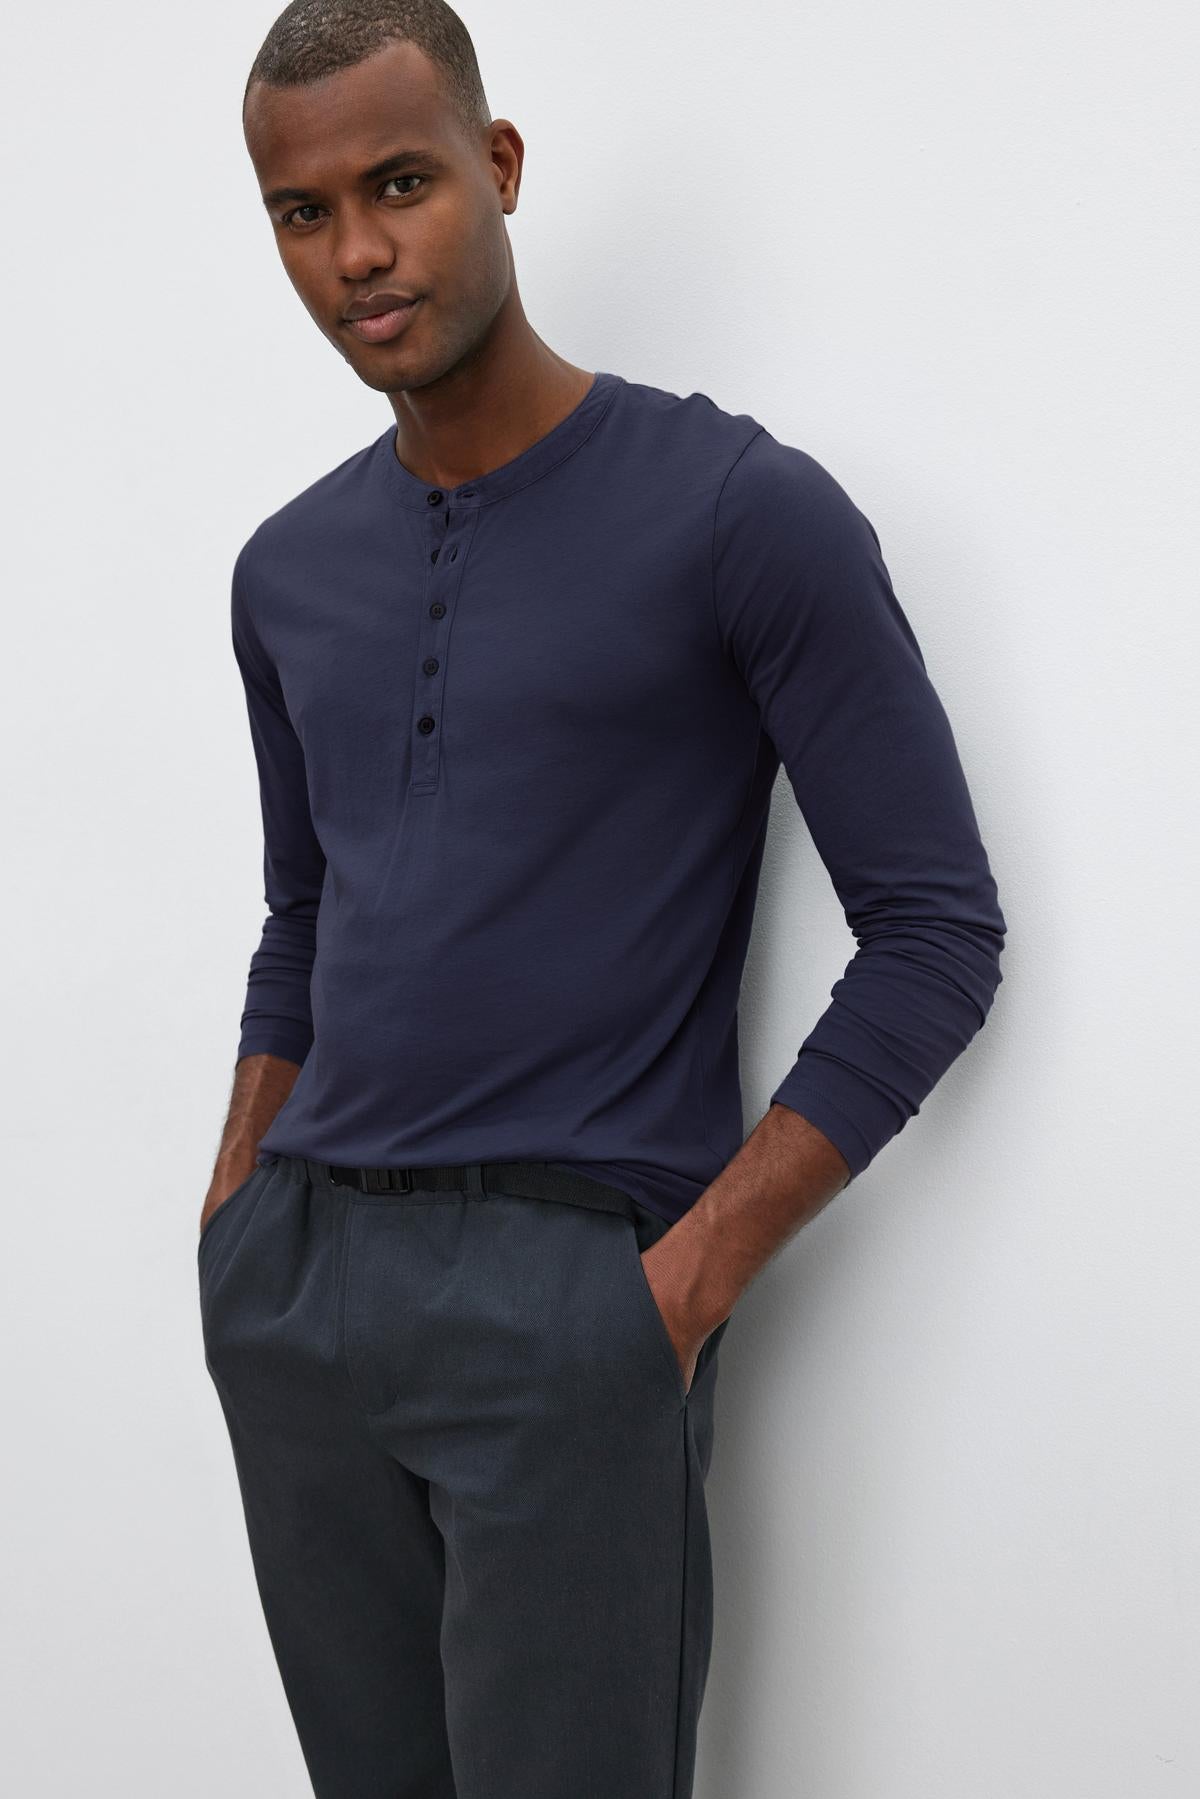 A man with short hair wears a navy long-sleeve ALVARO HENLEY by Velvet by Graham & Spencer and dark trousers, standing with his hands in his pockets against a plain white background.-36273890623681